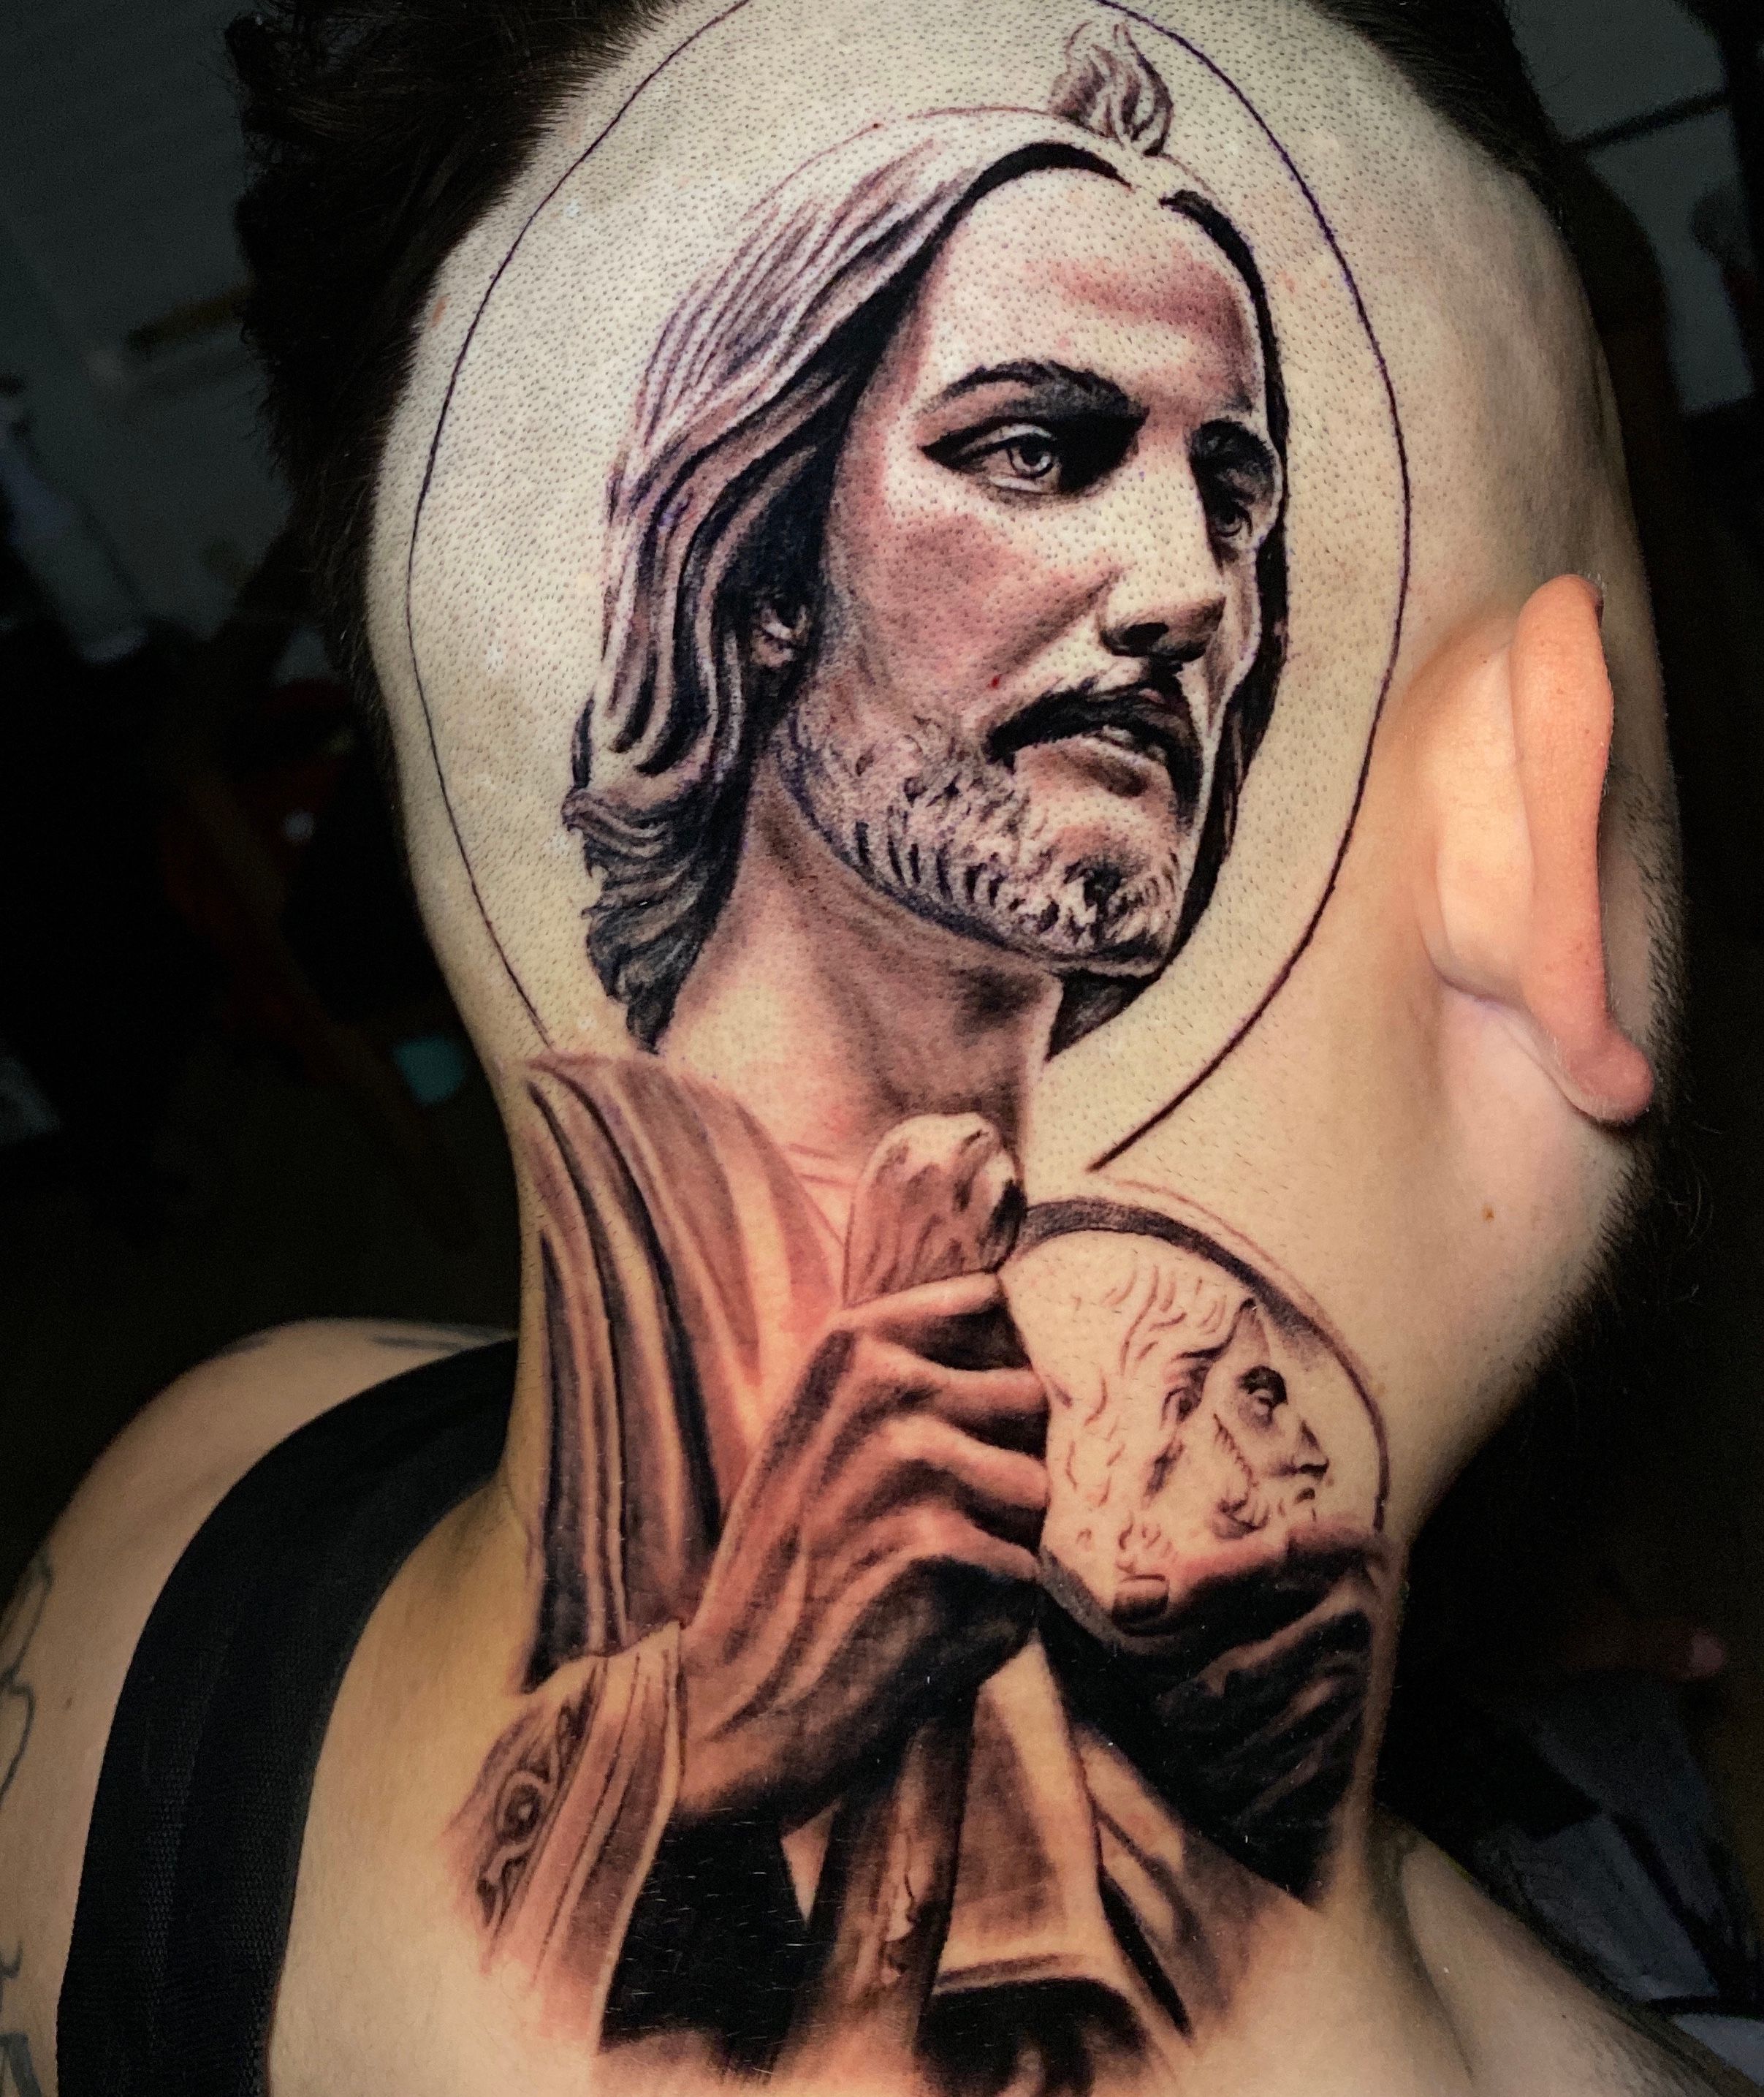 Tattoo uploaded by Uzi • San Judas Tadeo It's always an honor to do  religious tattoos it means a lot to me to be able to bless someone with my  blessing. I